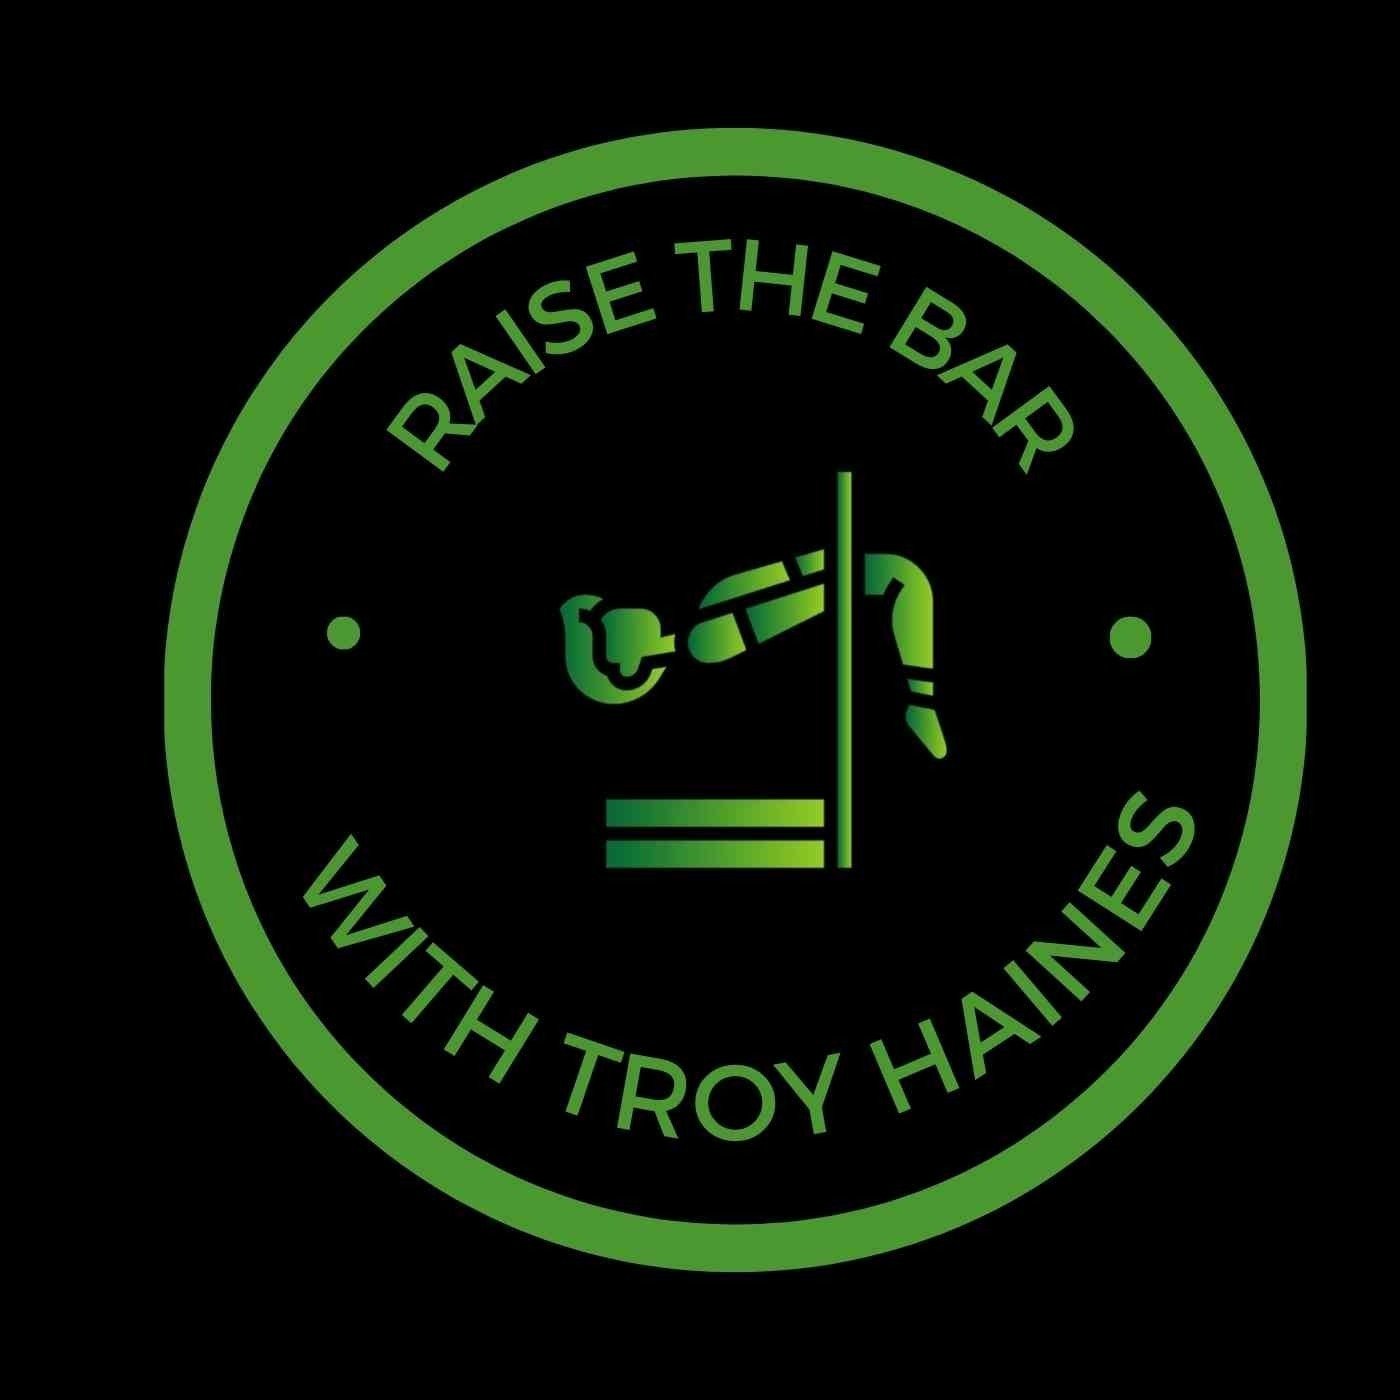 Raise the Bar with Troy Haines, Season 2: The Laboratory Journey #4 - Mapping Greg Stull's Pole Vaulting Route: UCLA to Chapman University